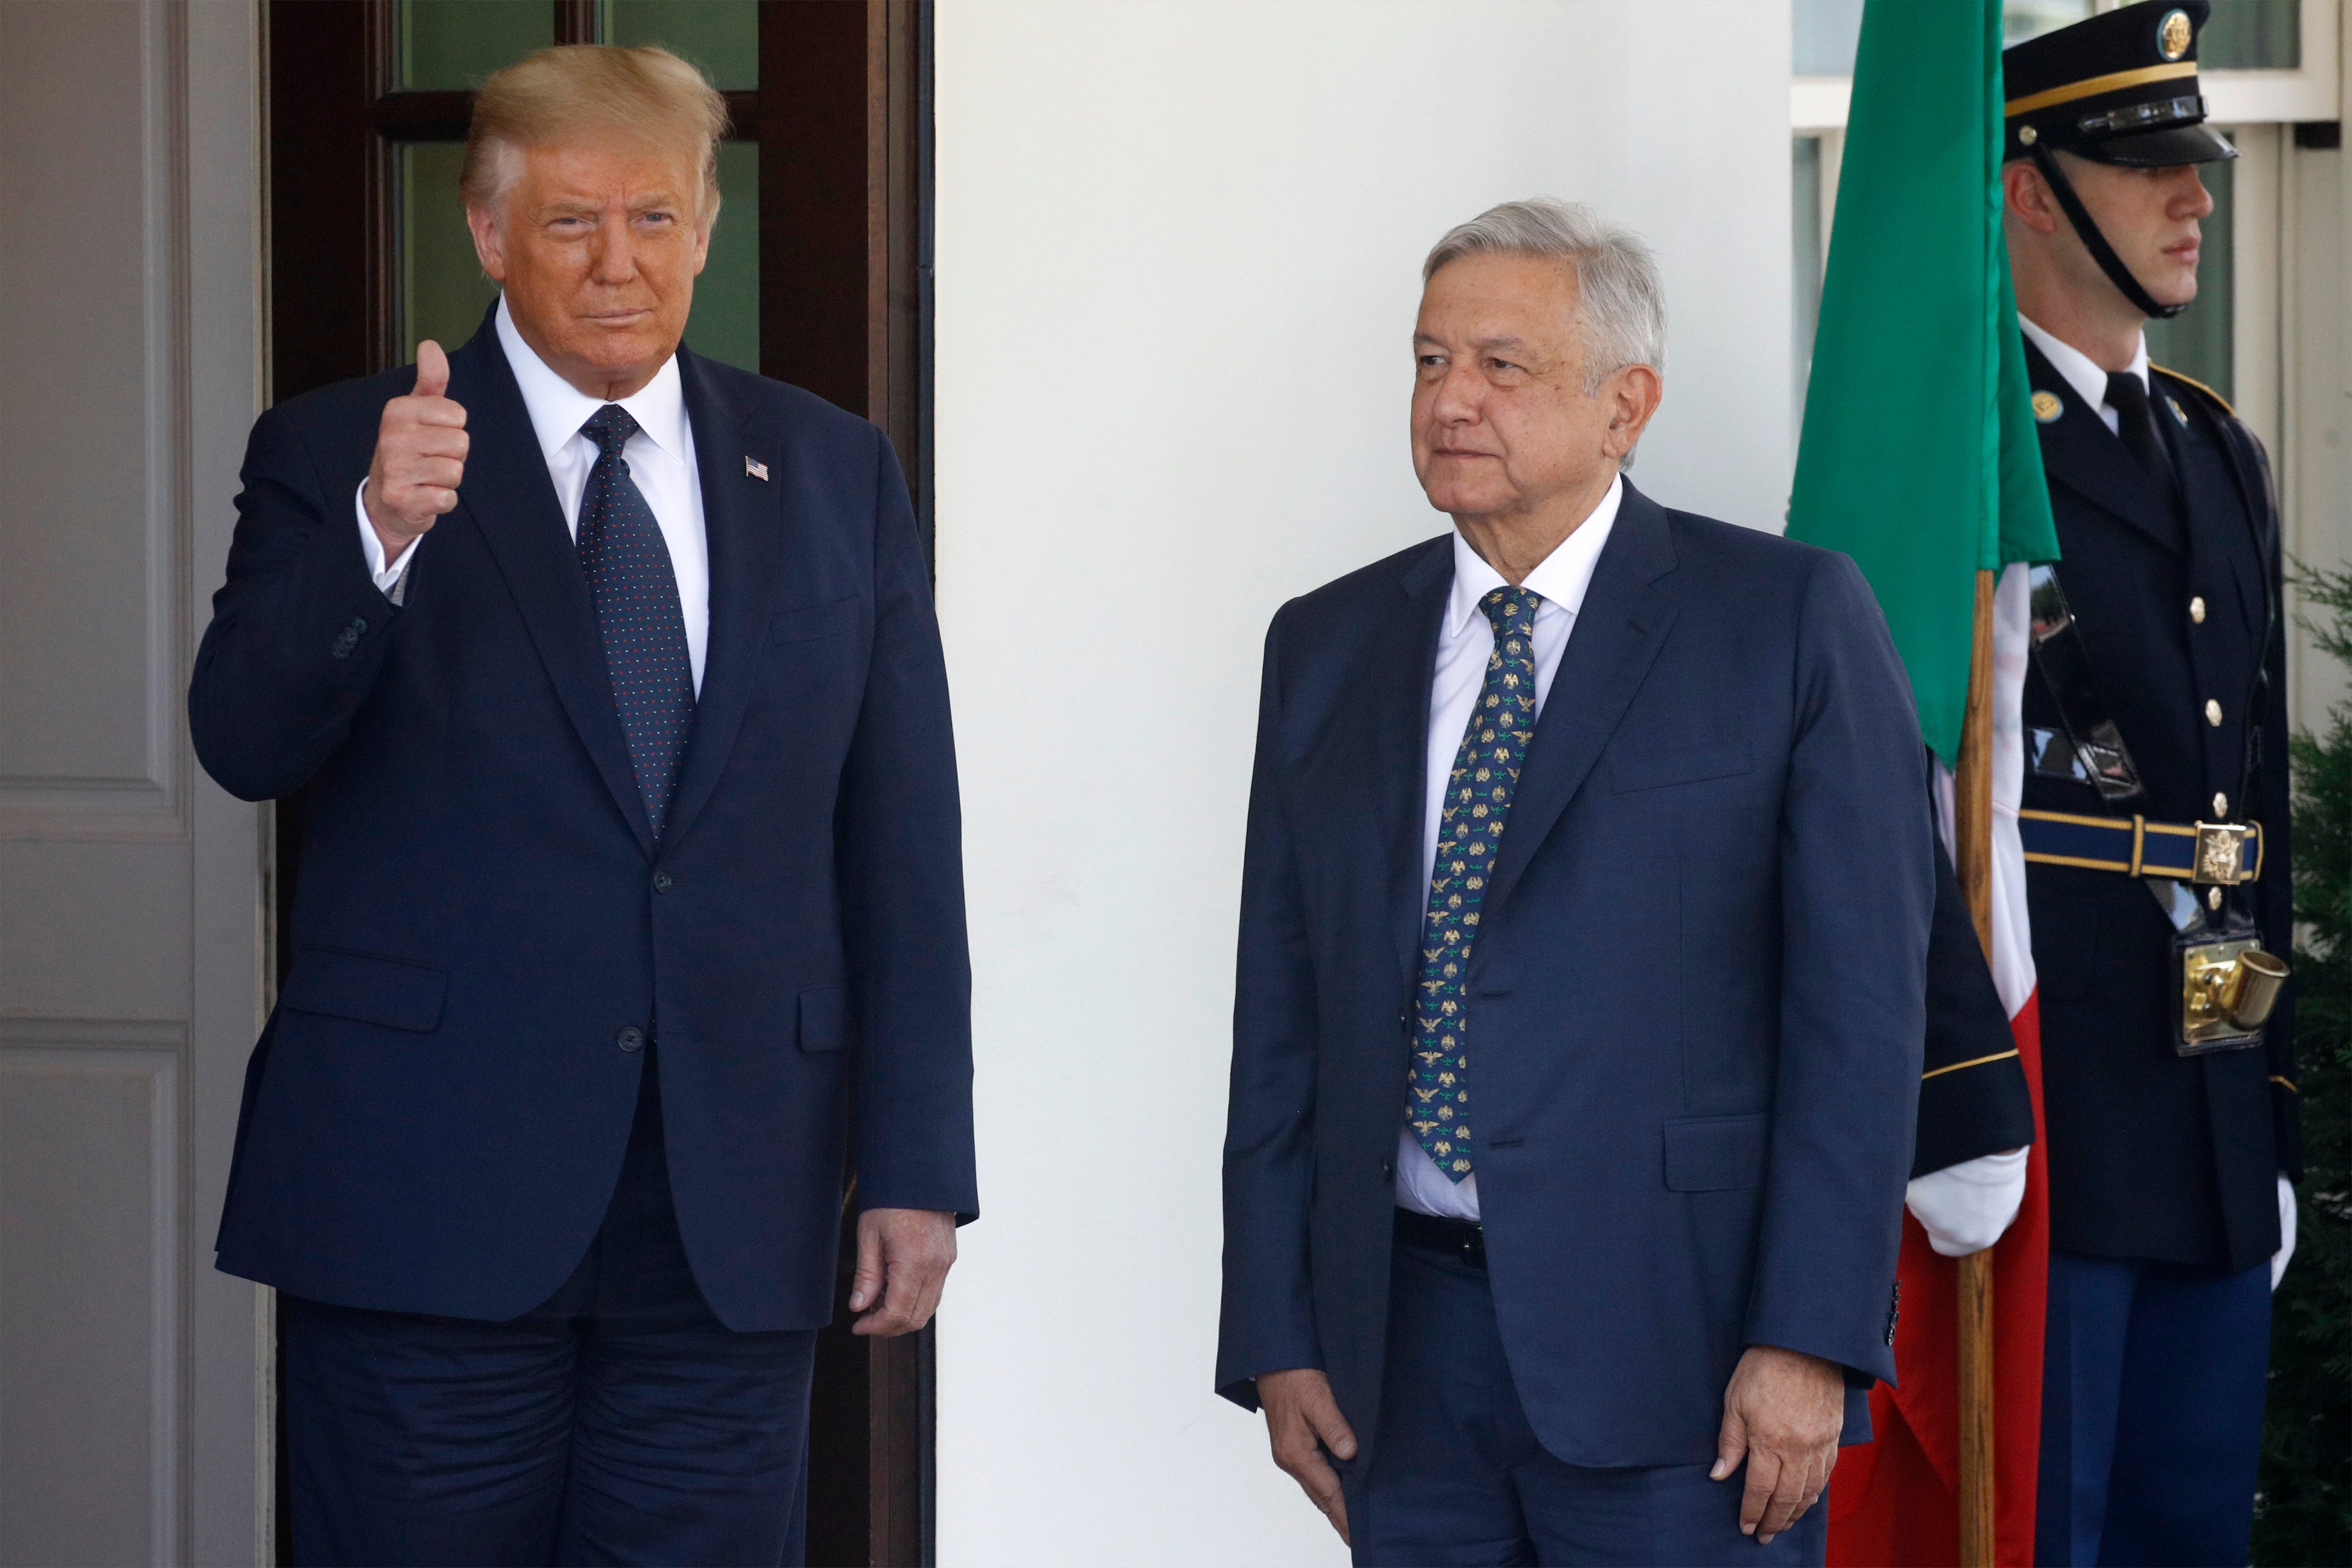 This week marked the visit of Mexican President Andrés Manuel López Obrador to the United States to meet with President Trump